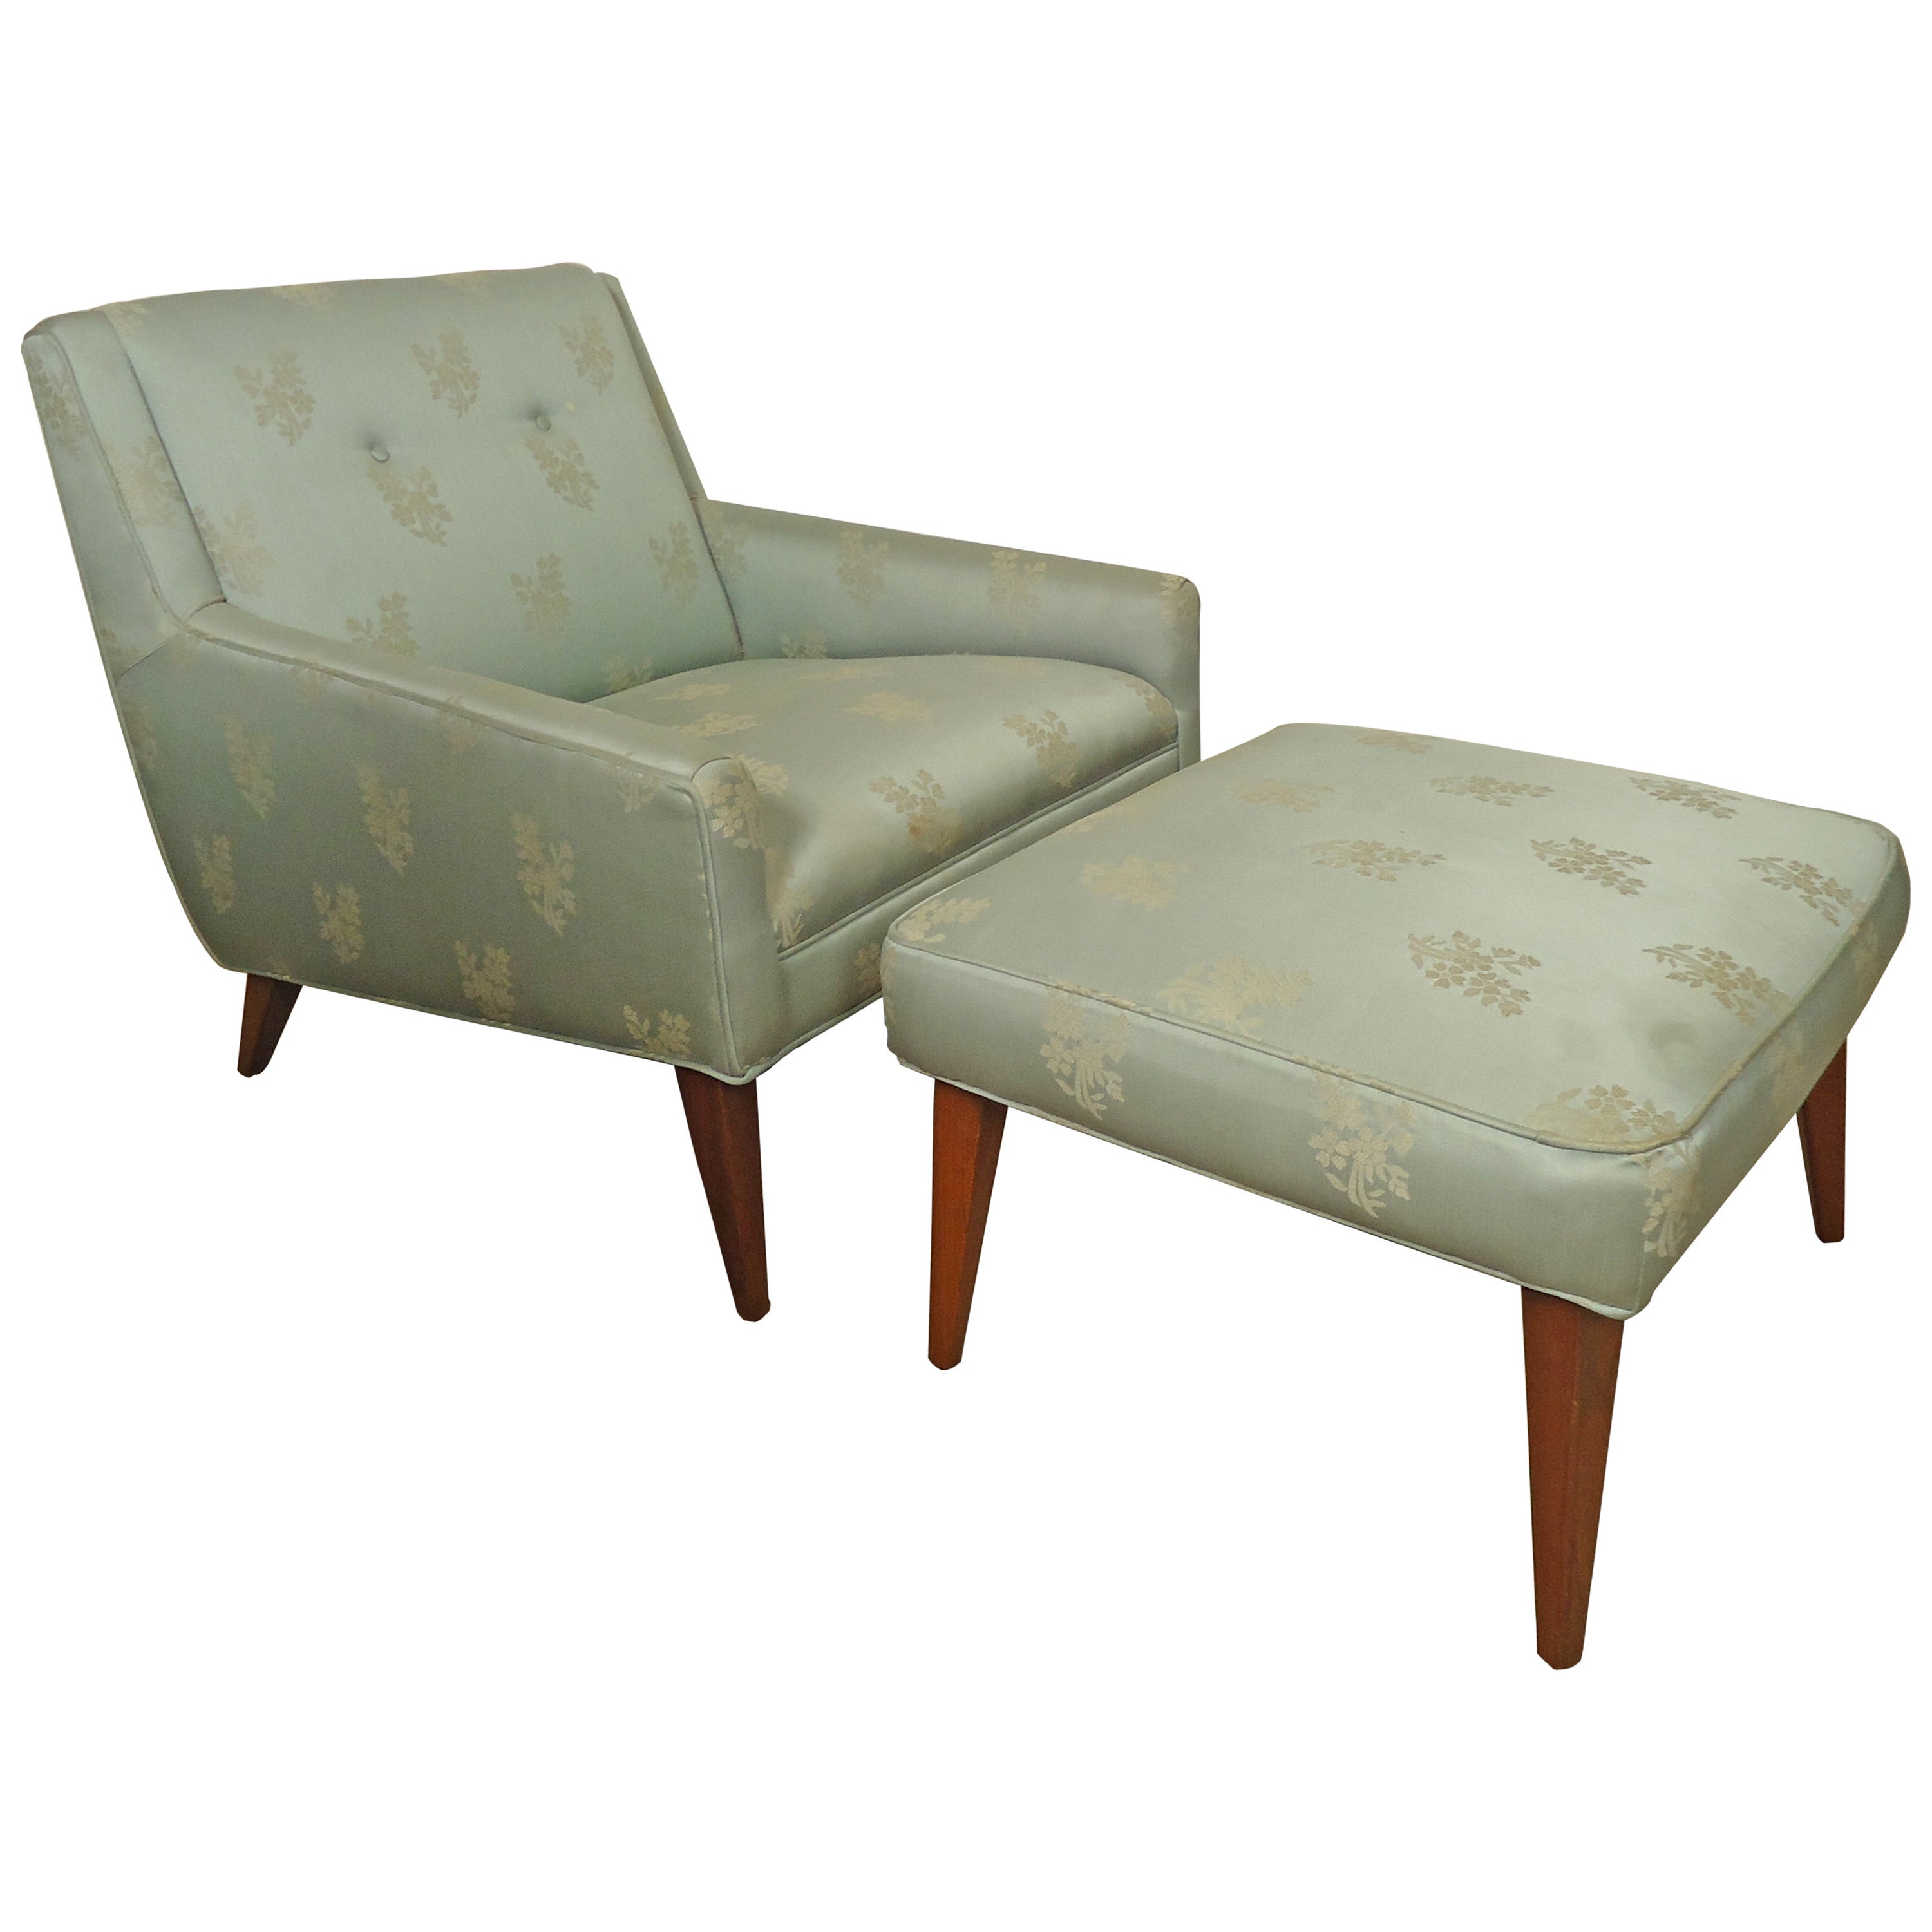 Midcentury Lounge Chair with Matching Ottoman For Sale